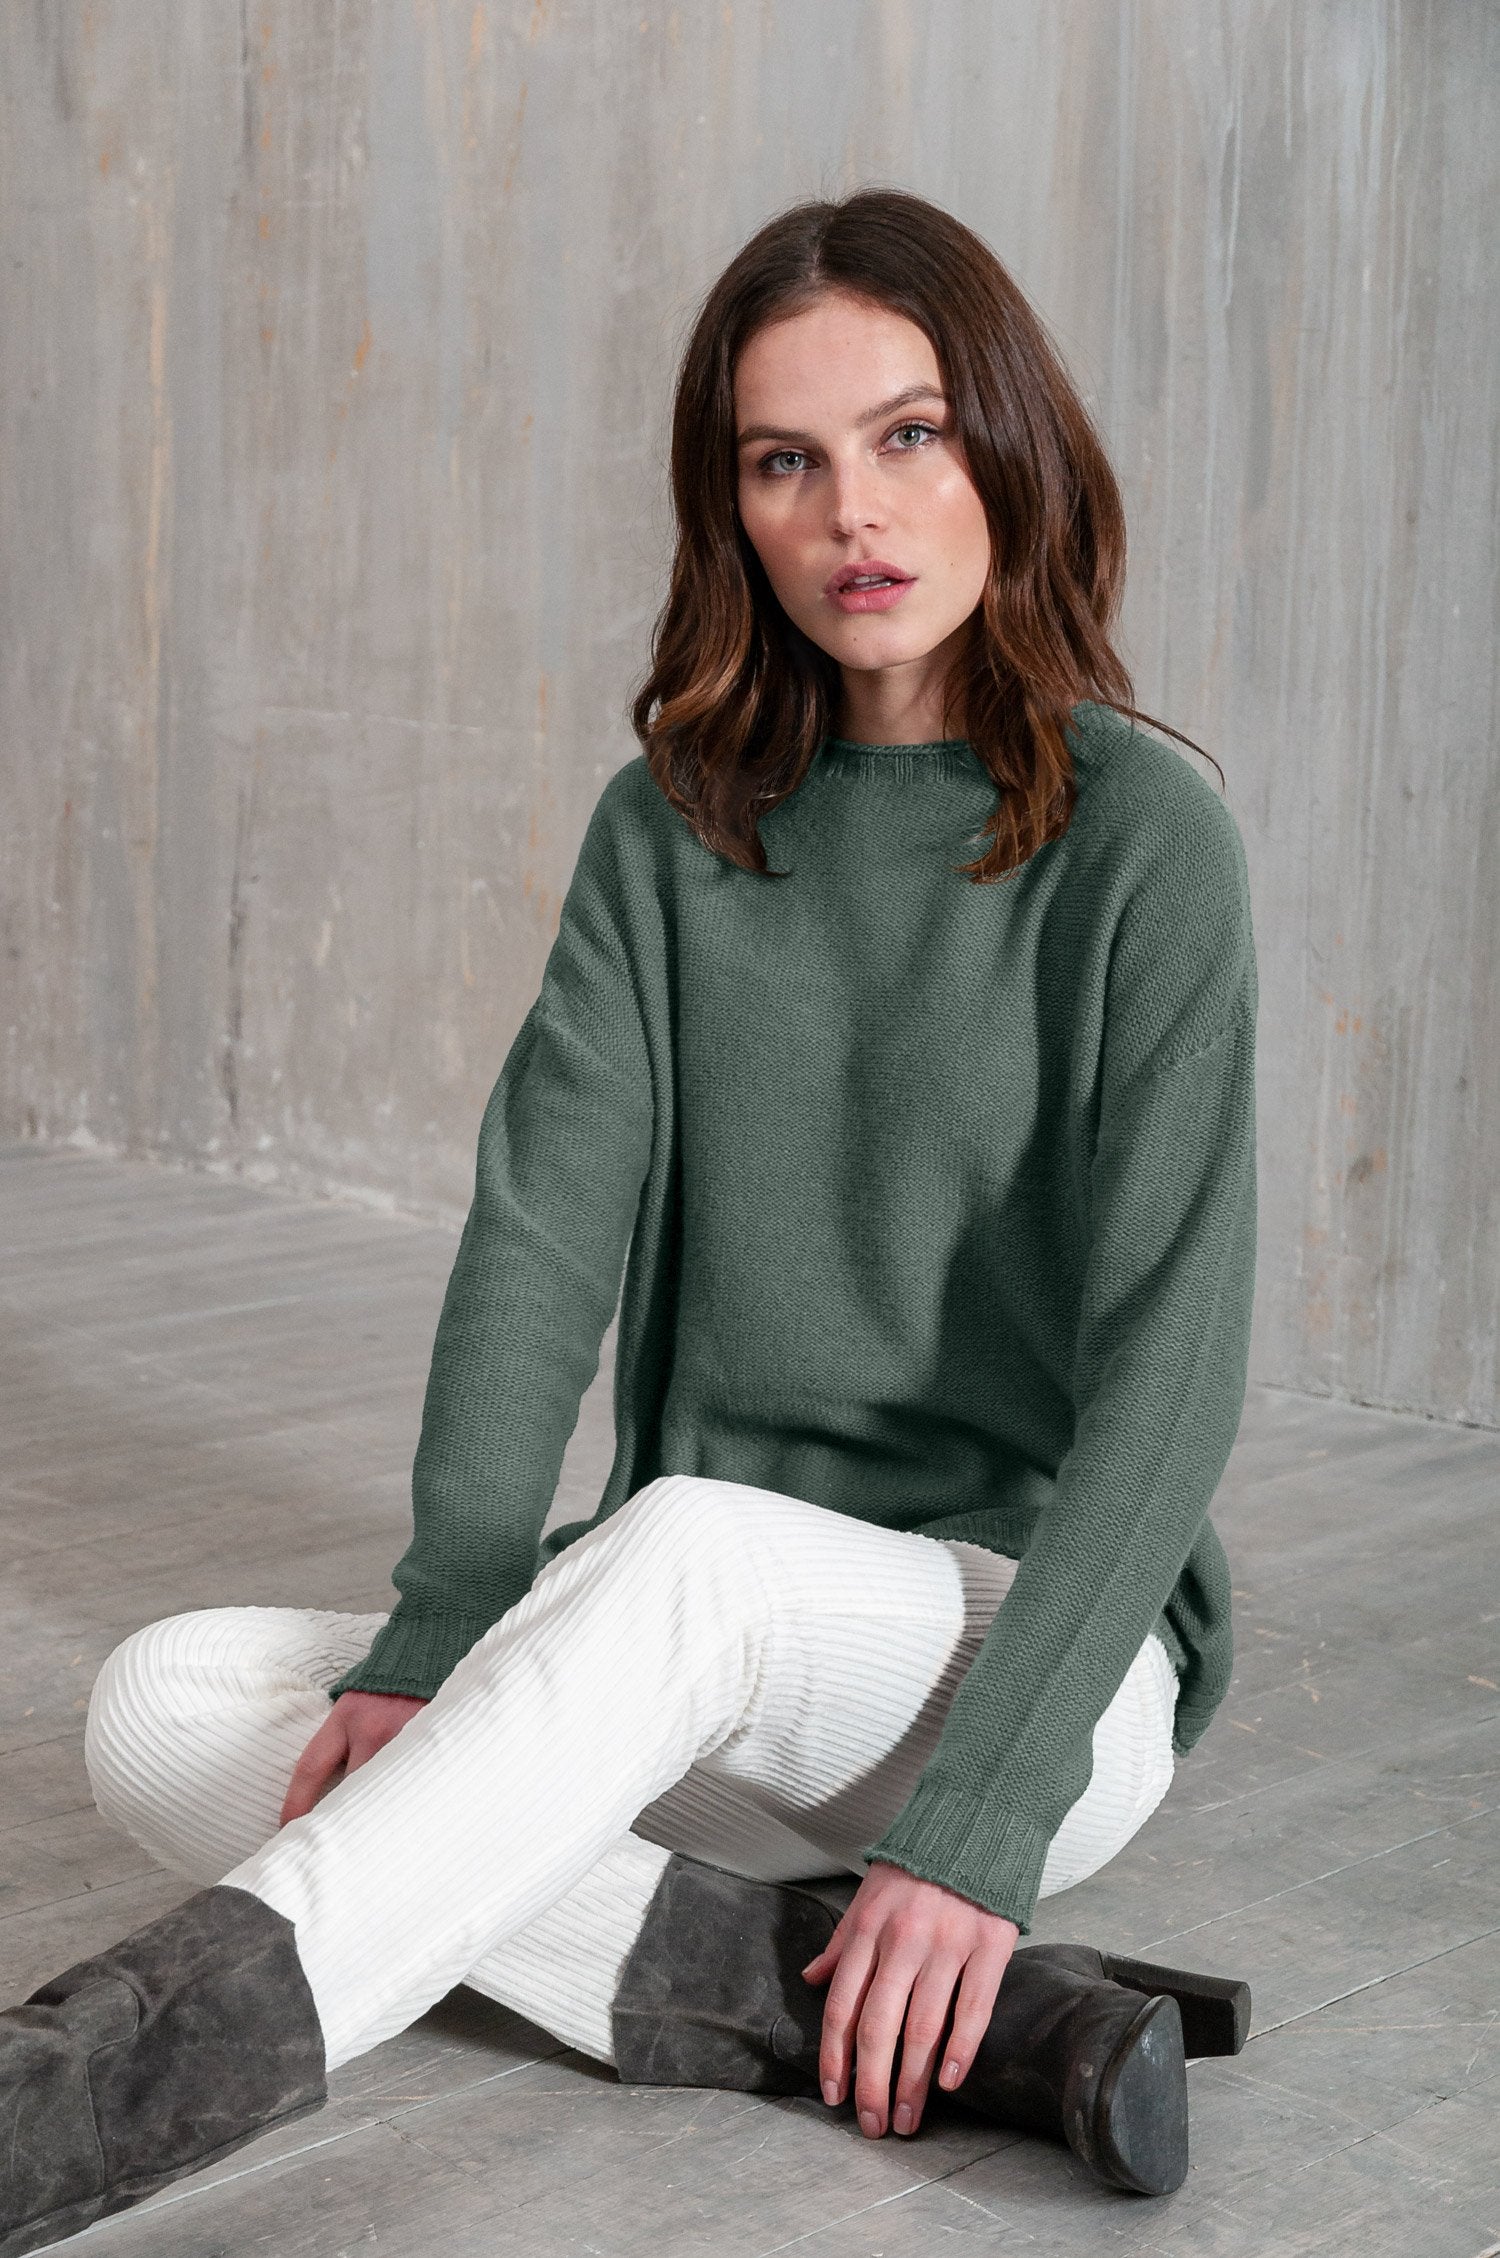 Mosshill Sage - Loose Fit Crew Sweater - Sweaters